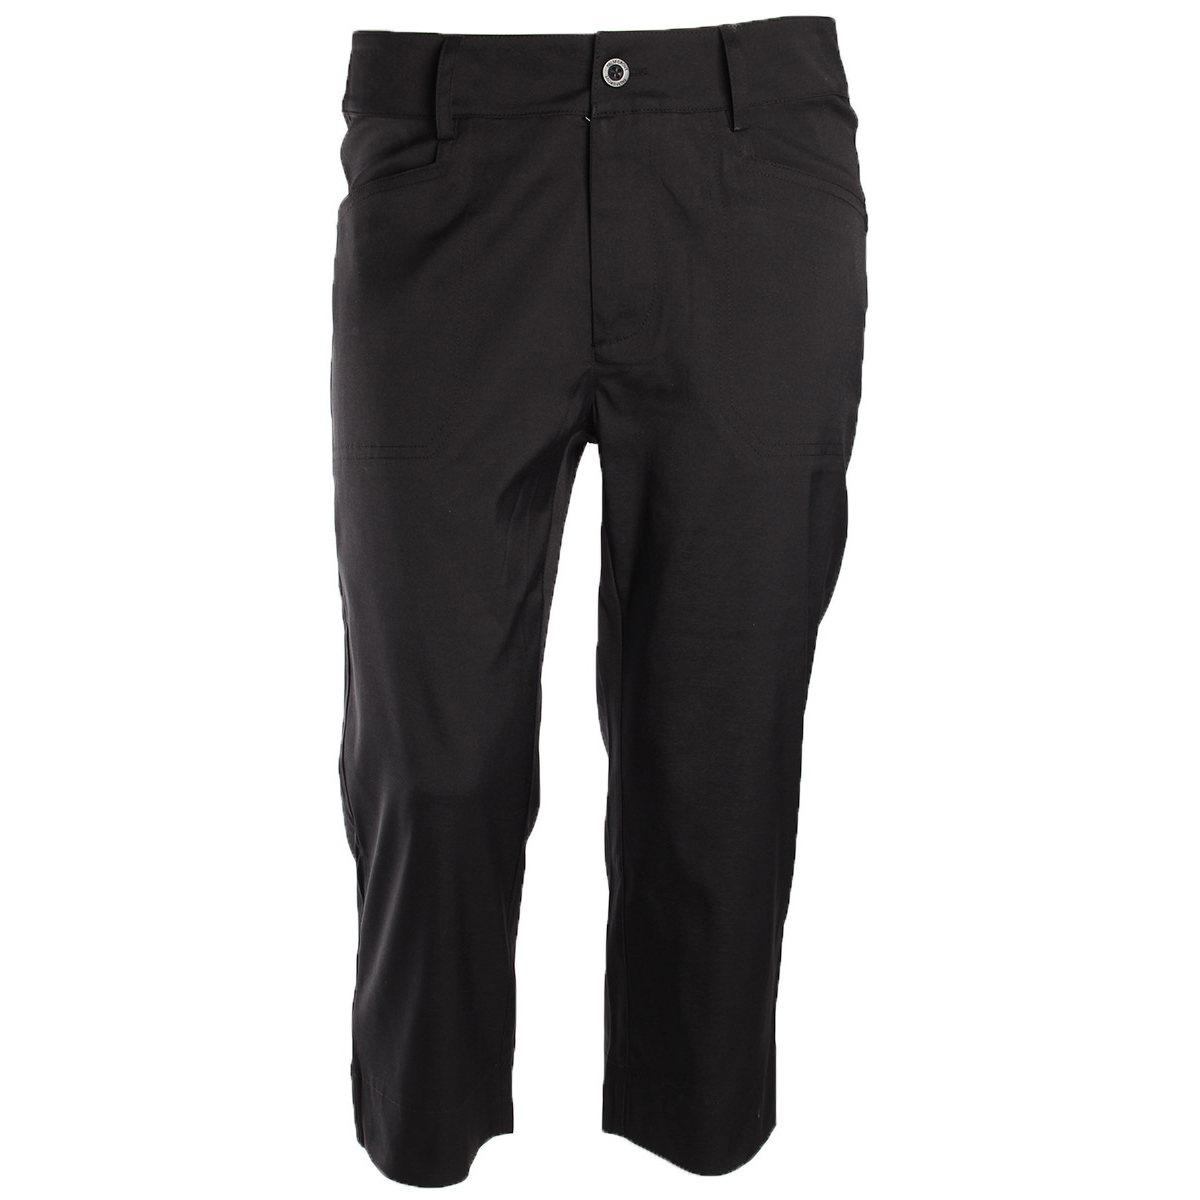 Palm Grove Capri Ladies Trousers from american golf